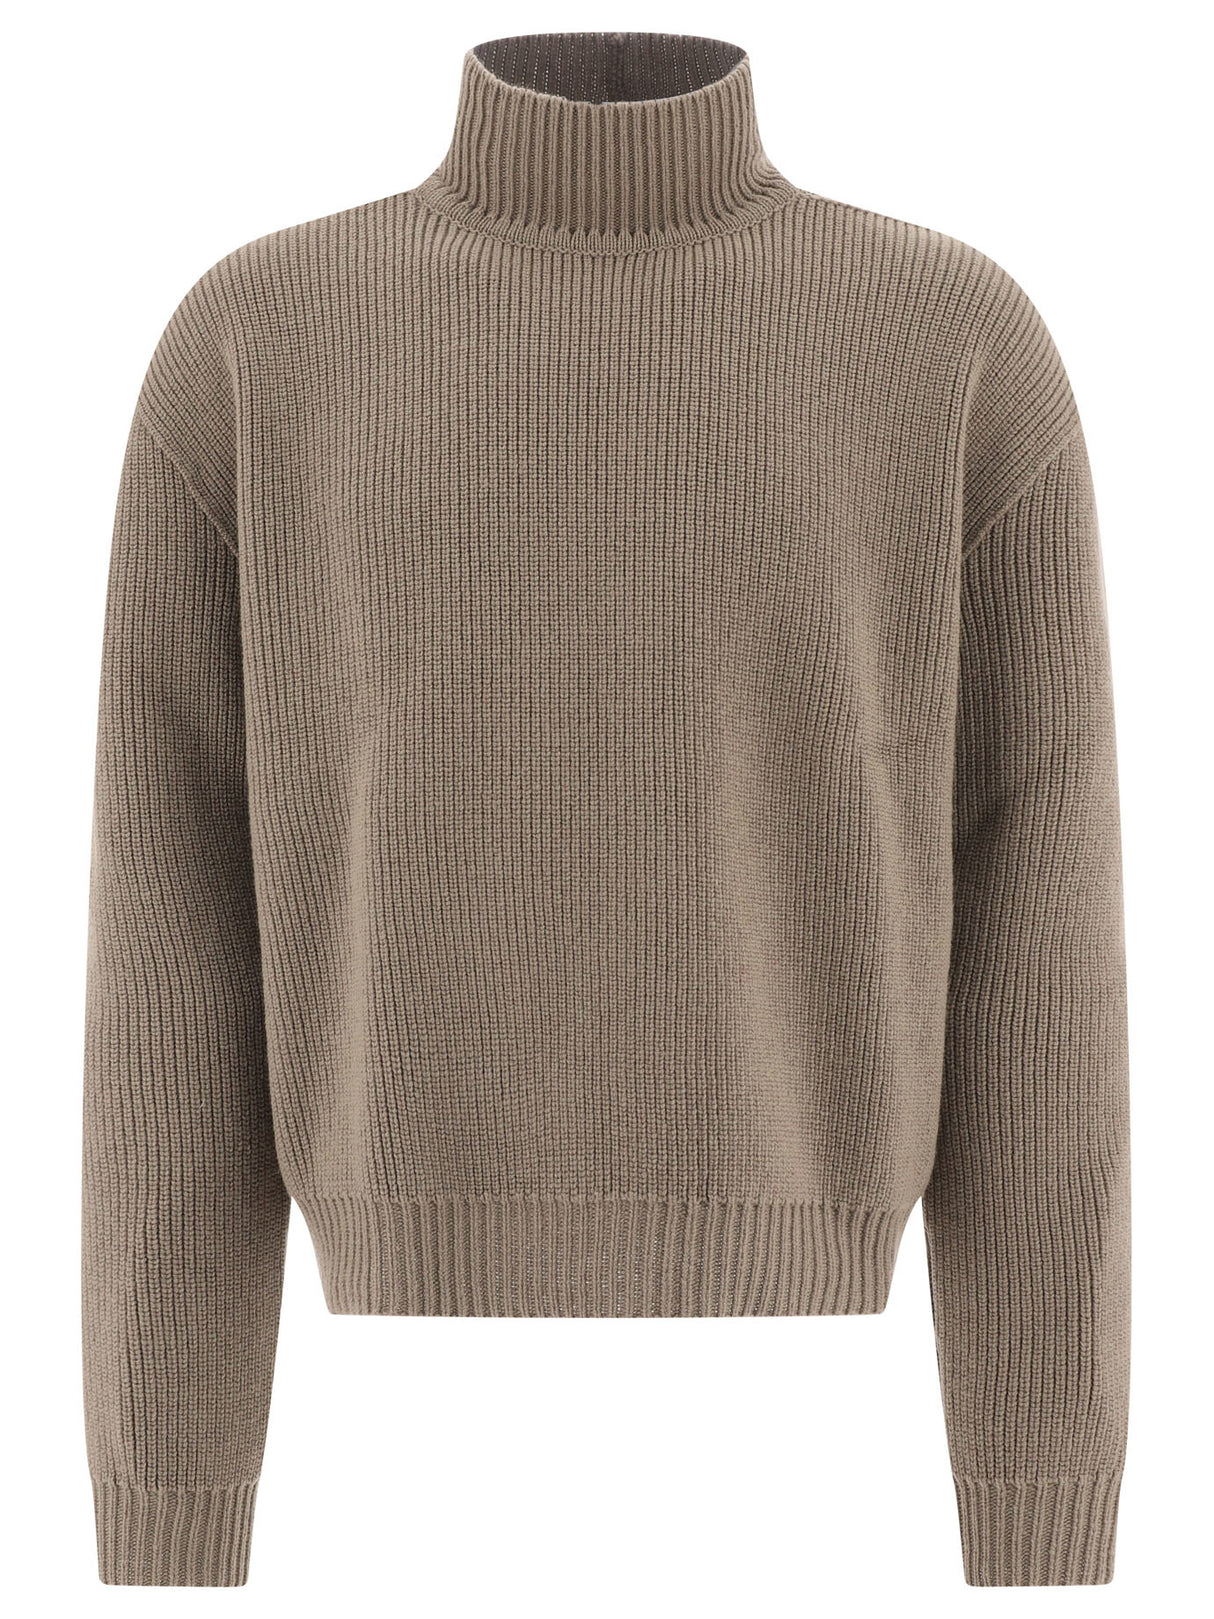 DRKSHDW RIBBED SWEATER